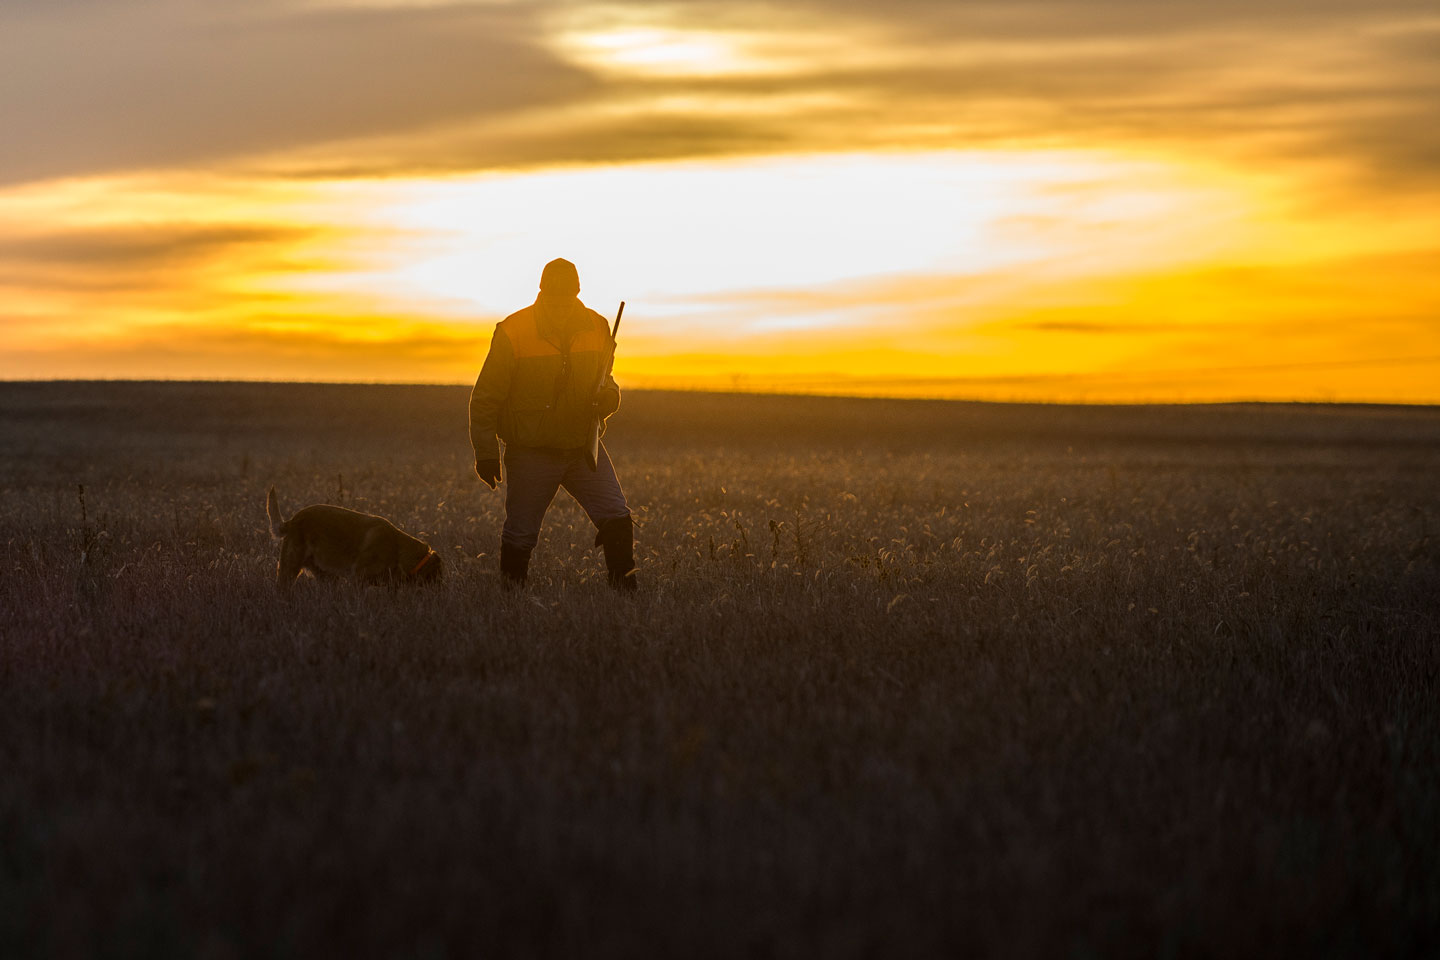 A man and his Labrador are silhouetted by a setting sun as they walk through a stubble field.